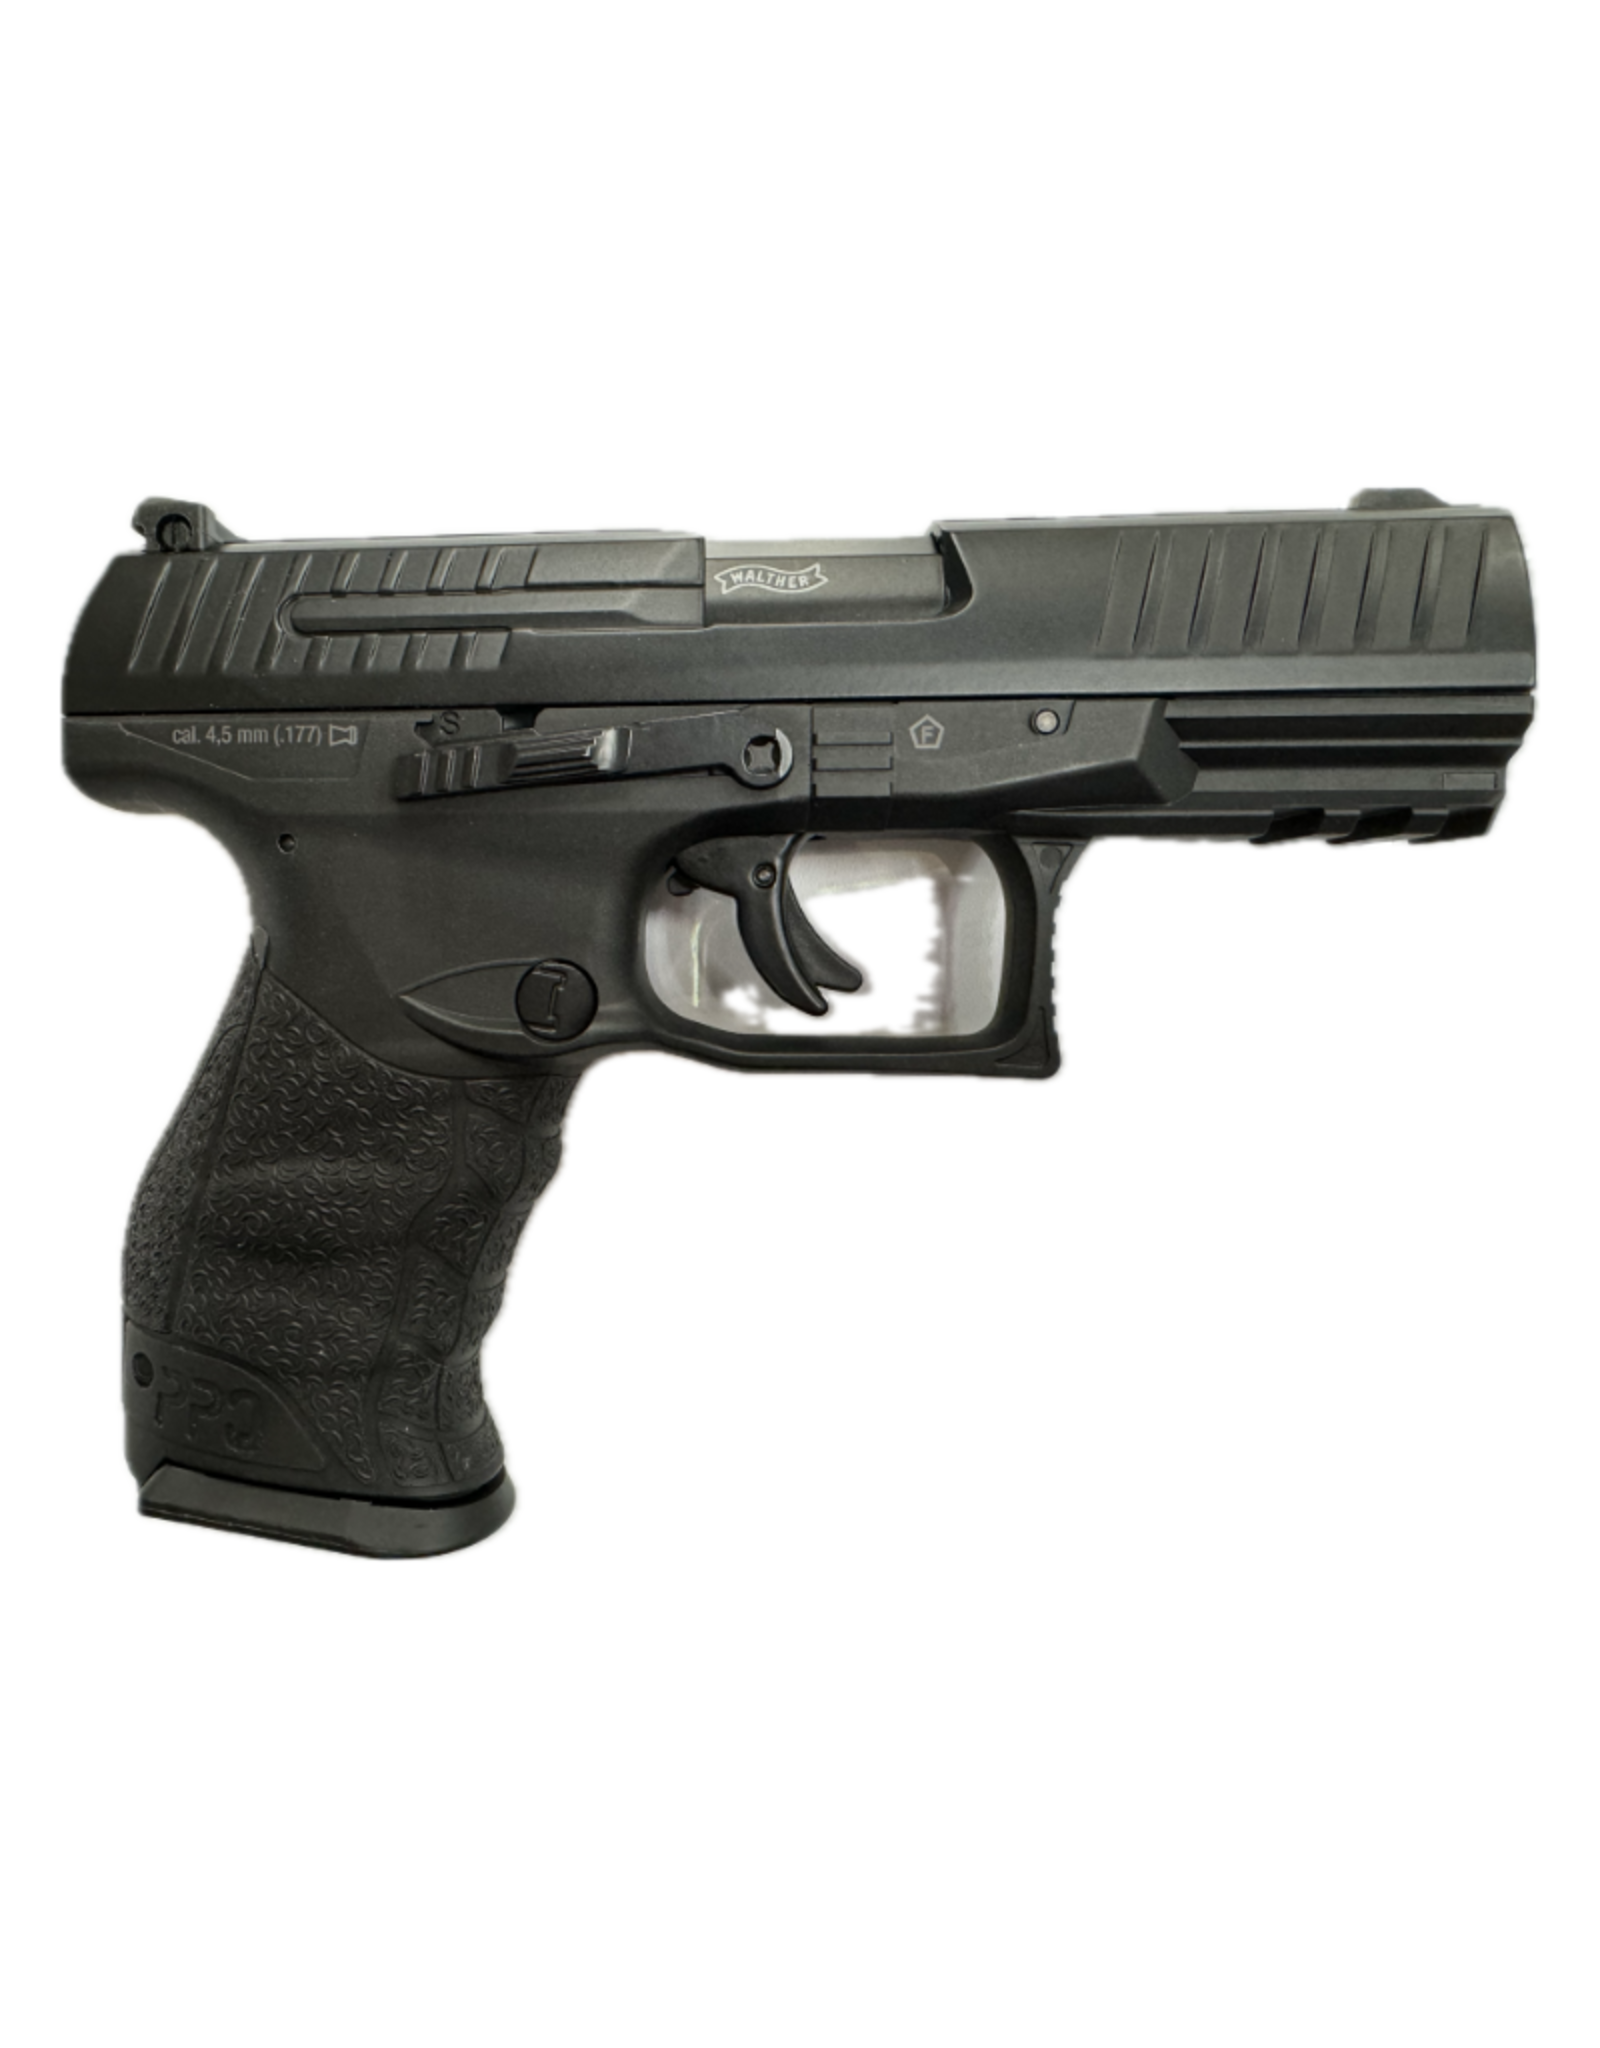 *PRE-OWNED* Walther PPQ .177